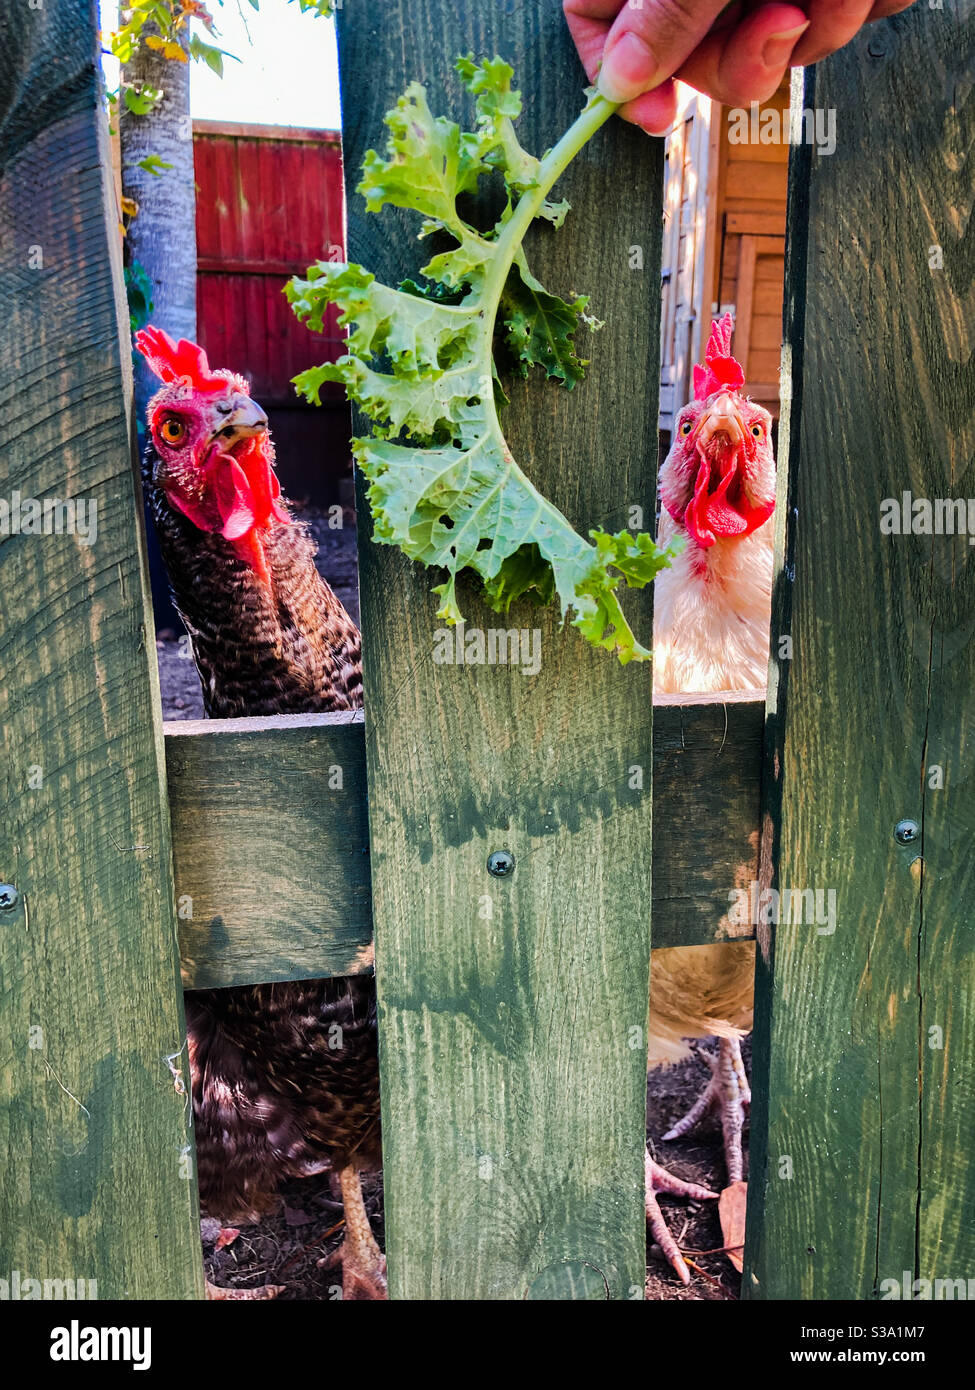 Hand feeding chickens with curly kales. Stock Photo